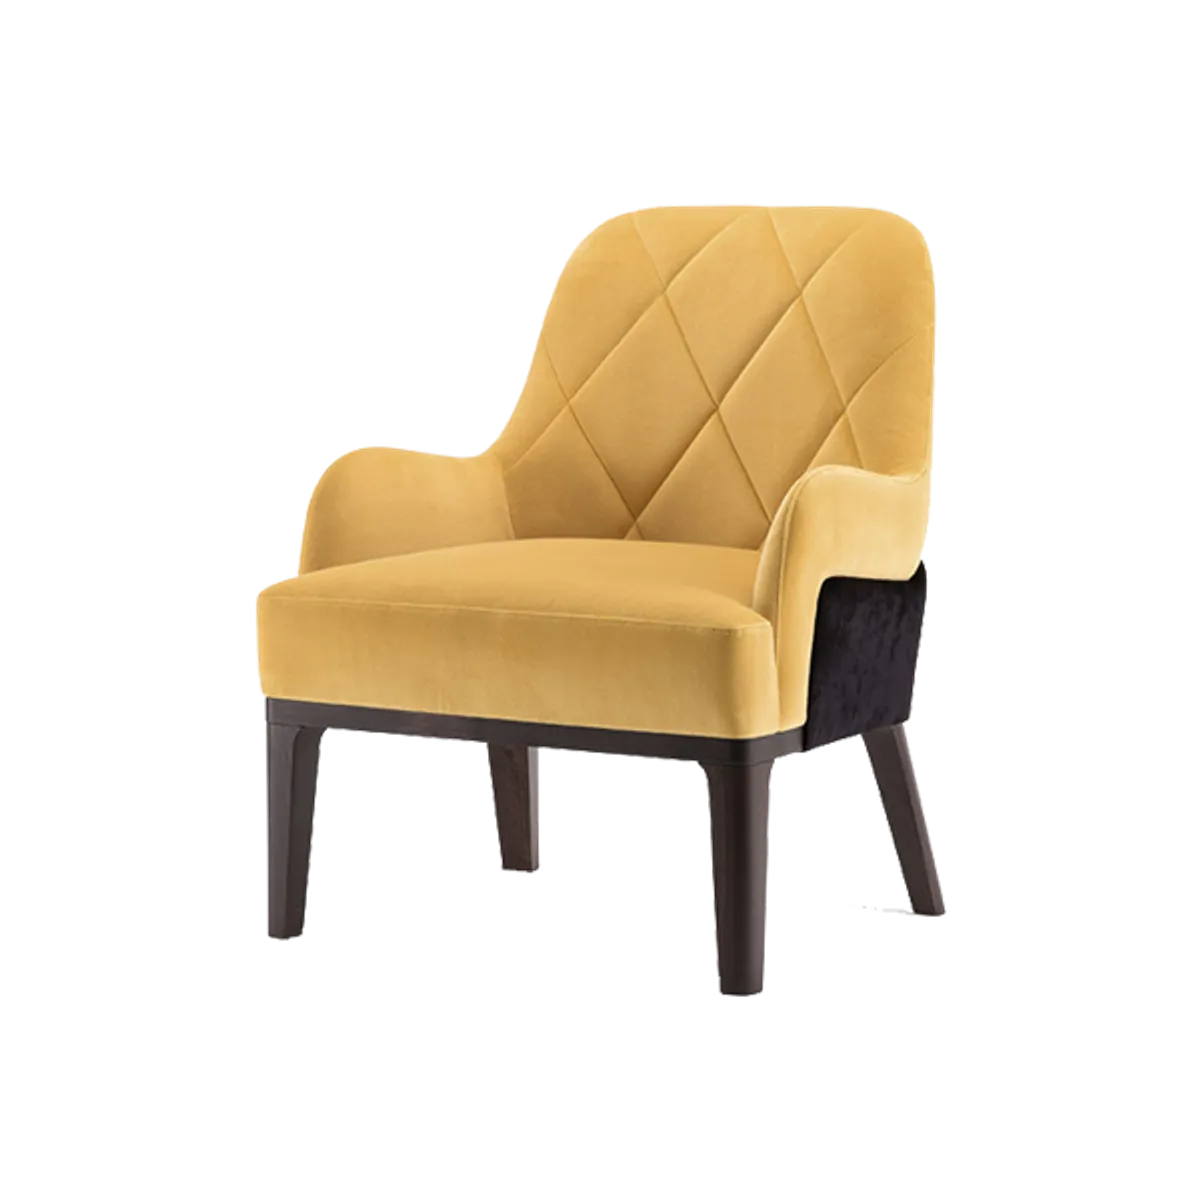 Web Dodie Lounge Chair Yellow Quilted Upholstery